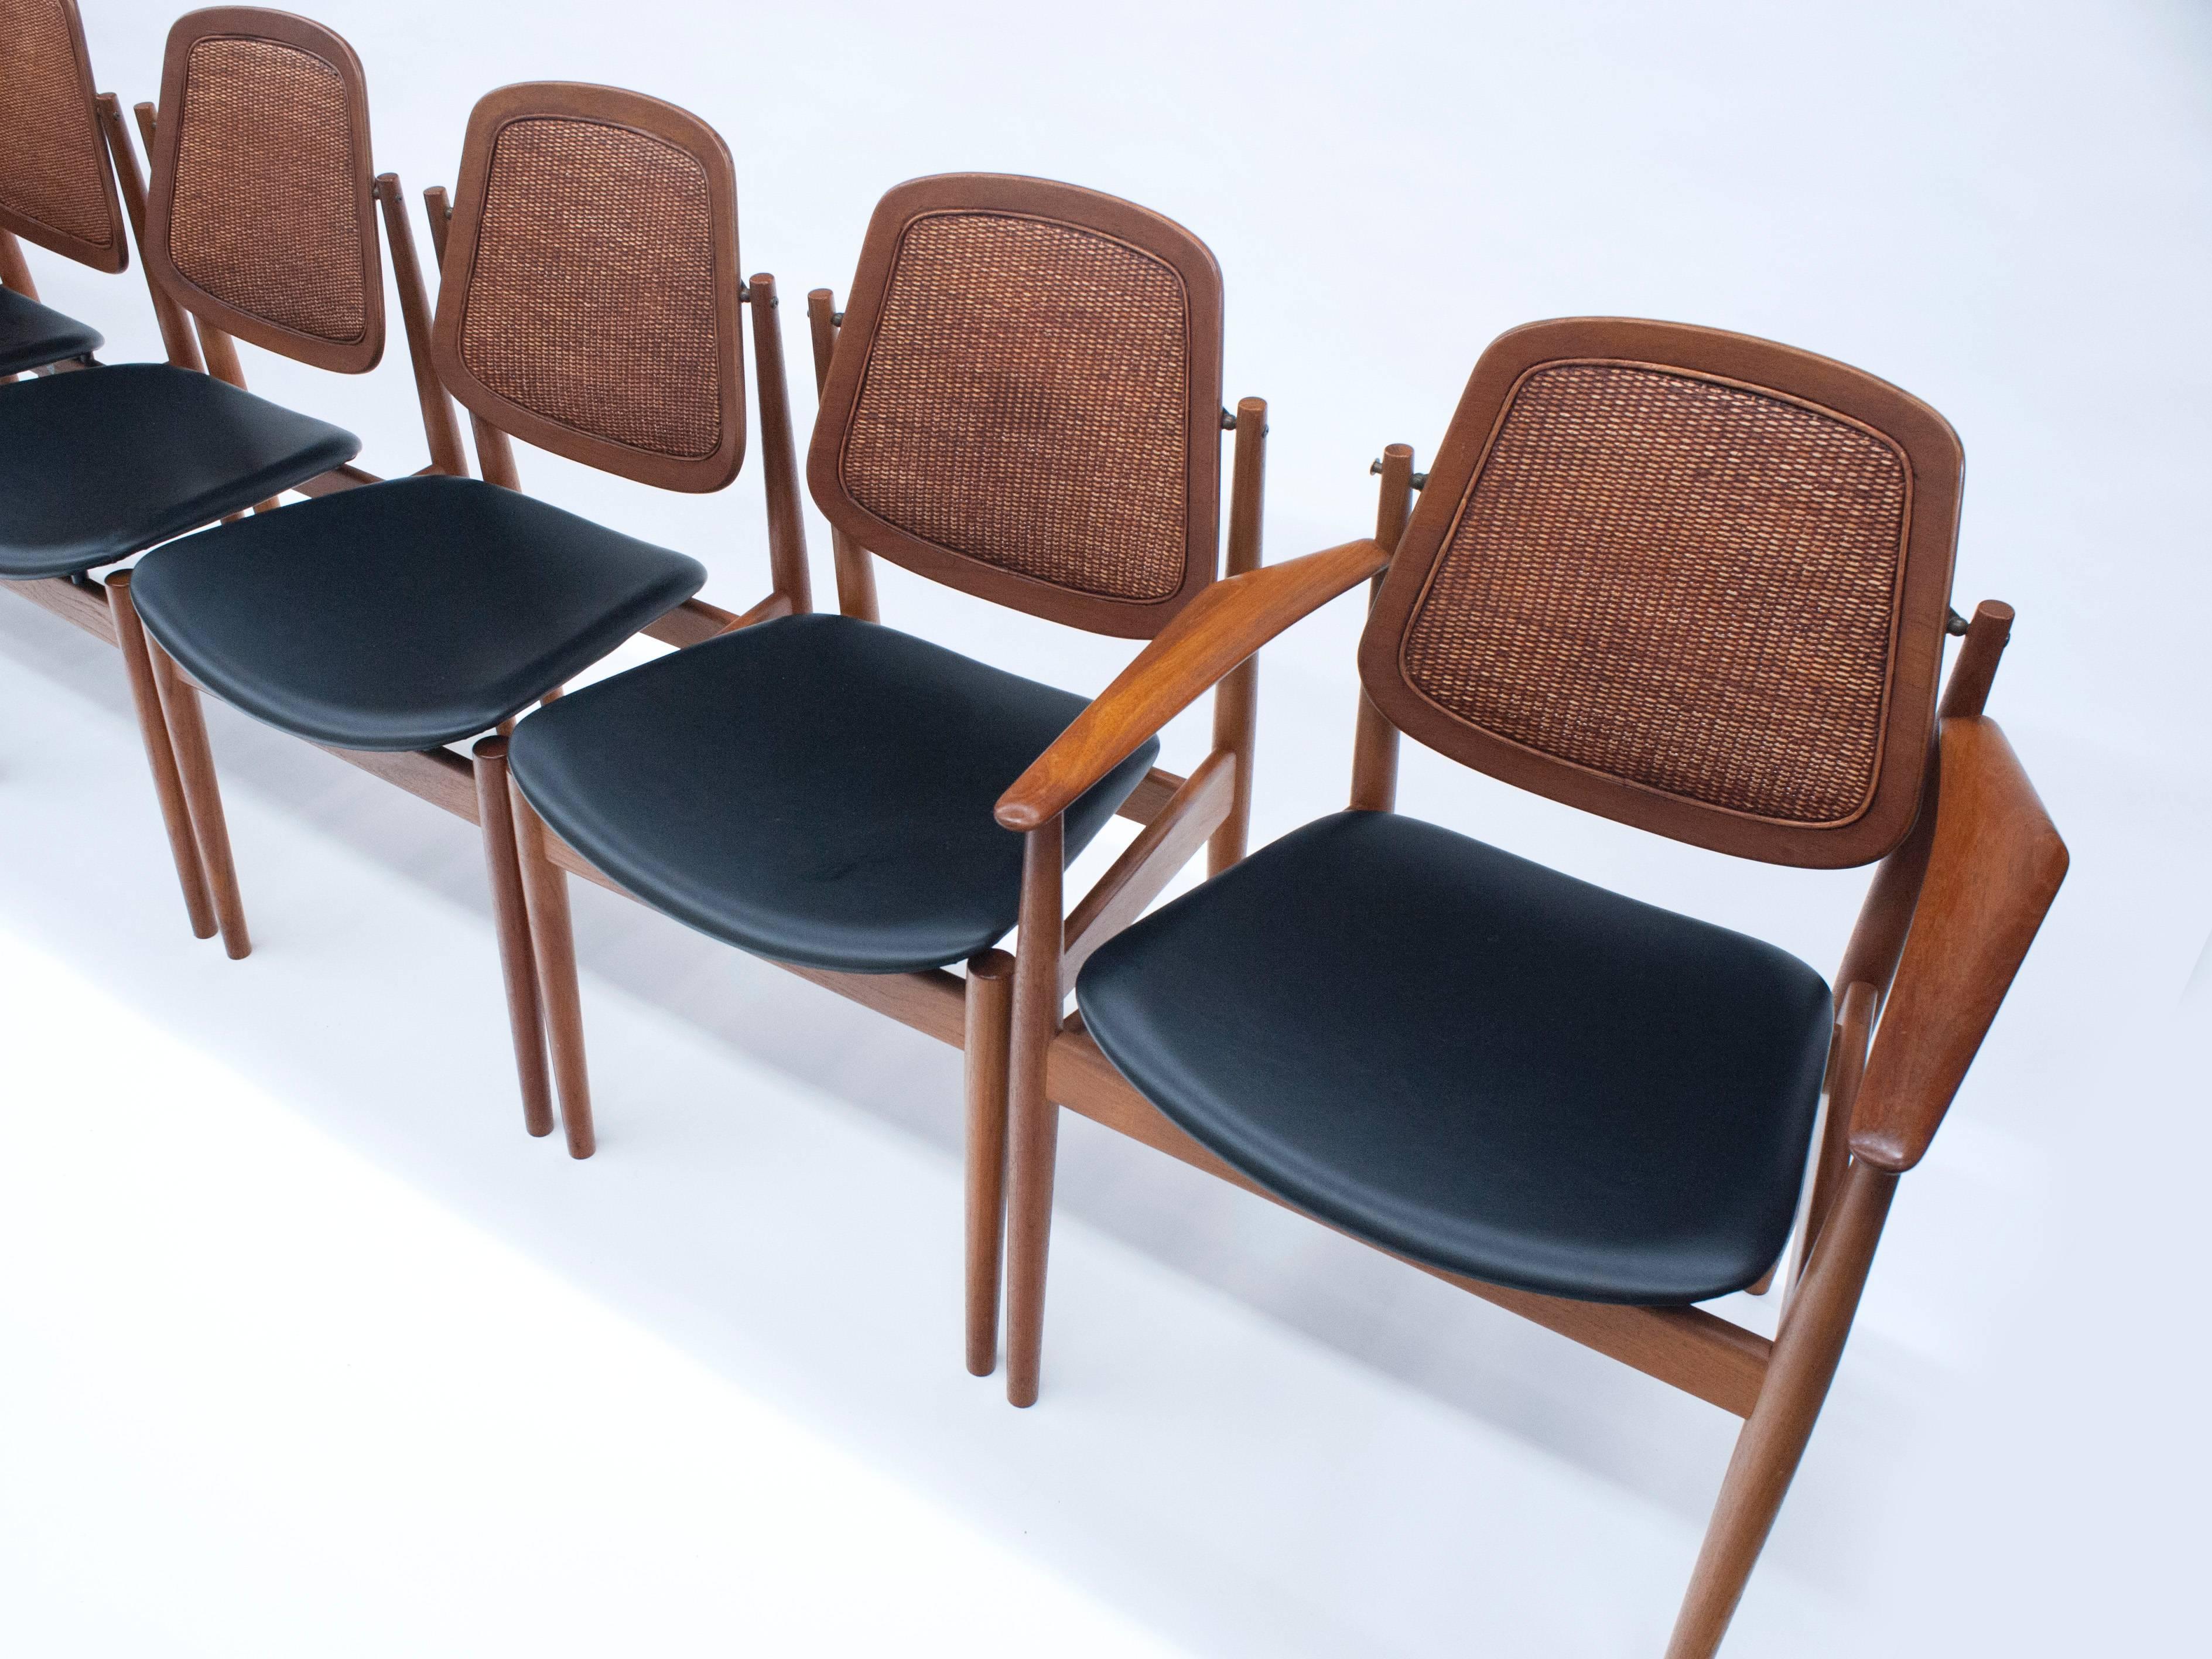 A set of six dining chairs by Danish designer Arne Vodder for France & Son. Chairs have a unique pivoting back with brass hardware. Chairs have been reupholstered with new foam and high quality synthetic leather. Each chair is marked with the John